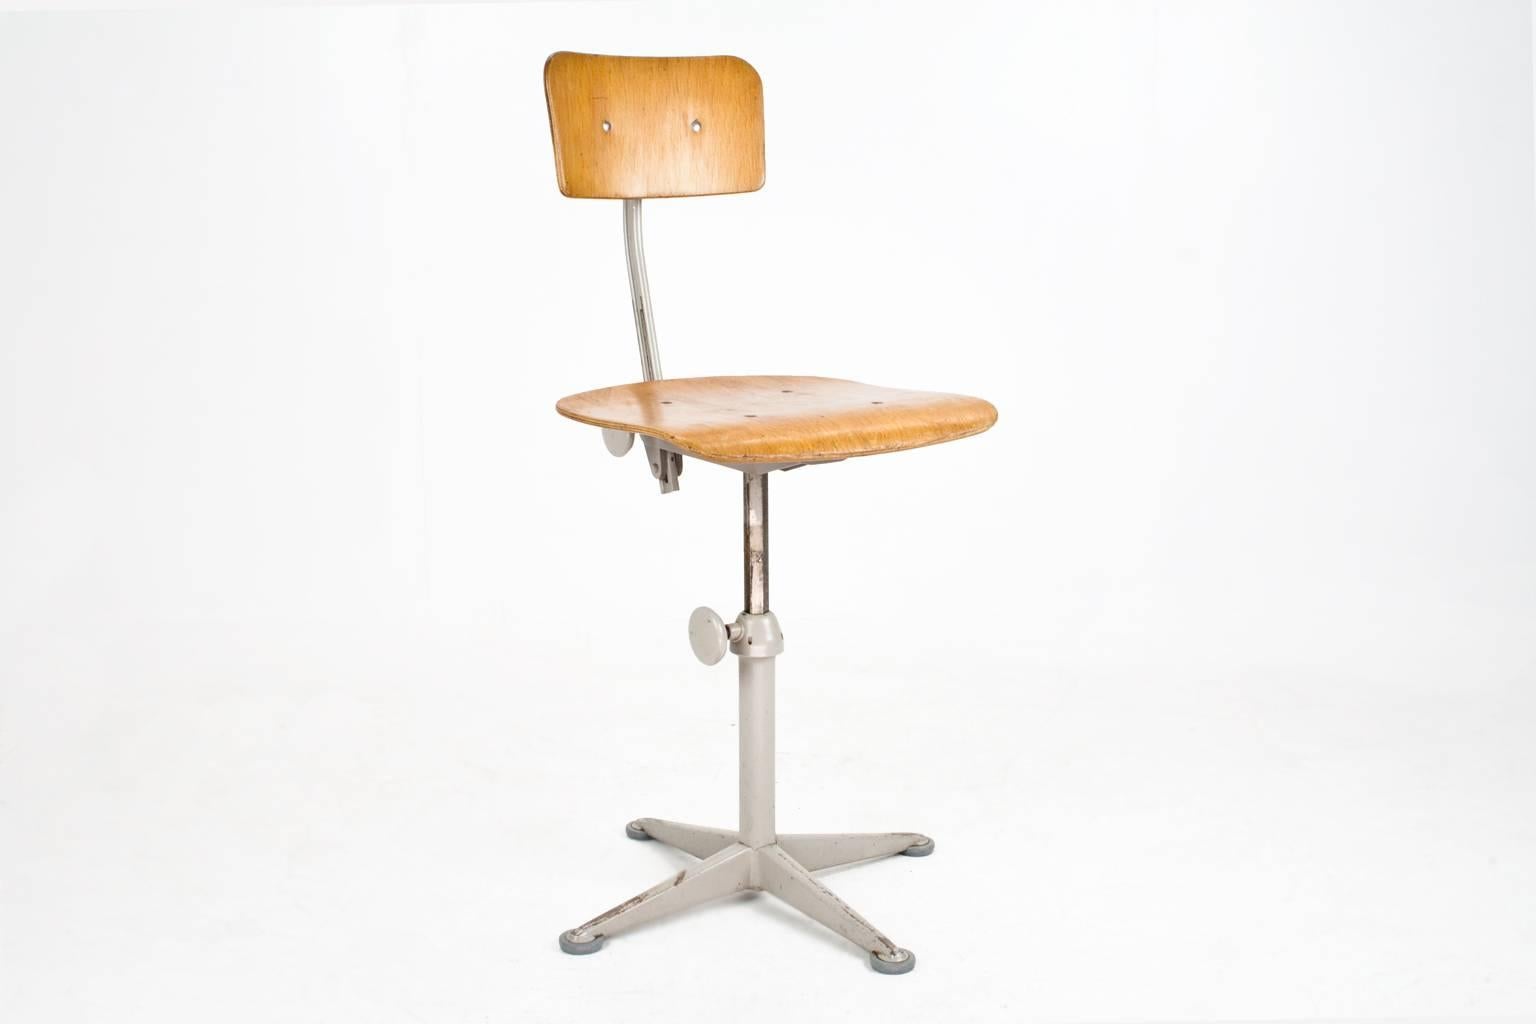 1963 Dutch Industrial Friso Kramer, drawing board chair by Ahrend de Cirkel. Wood and metal, adjustable in height and rotatable. Brand present. The item has beautiful patina, overall in very nice condition.

Measures: Seat height adjustable